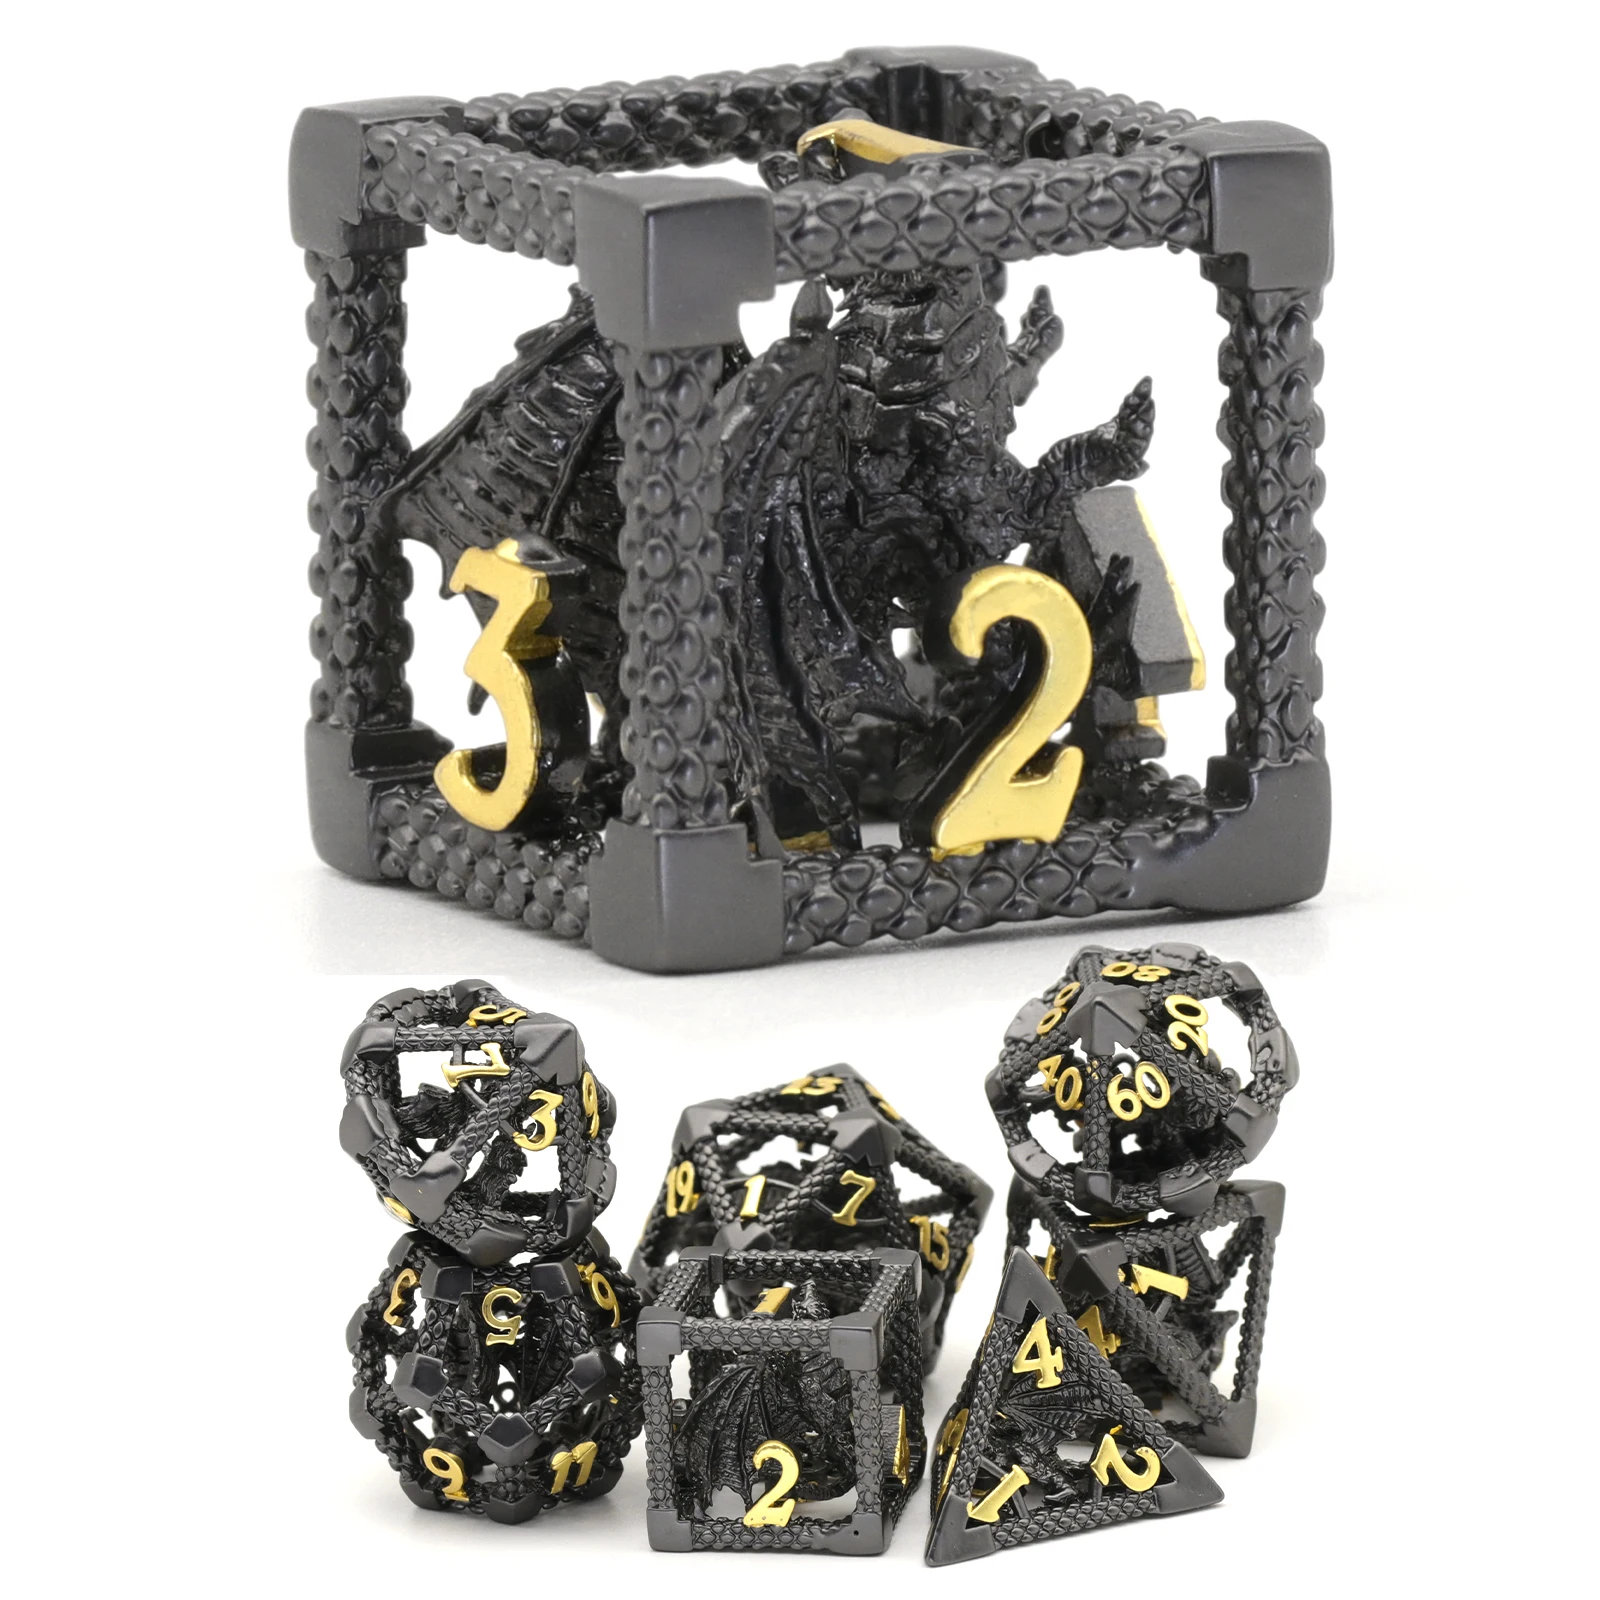 

Dragon Metal Dice, 7PC/Set Polyhedral Dice for Role Playing Game Dungeons and Dragons Dices, RPG Dice(Black Glod)